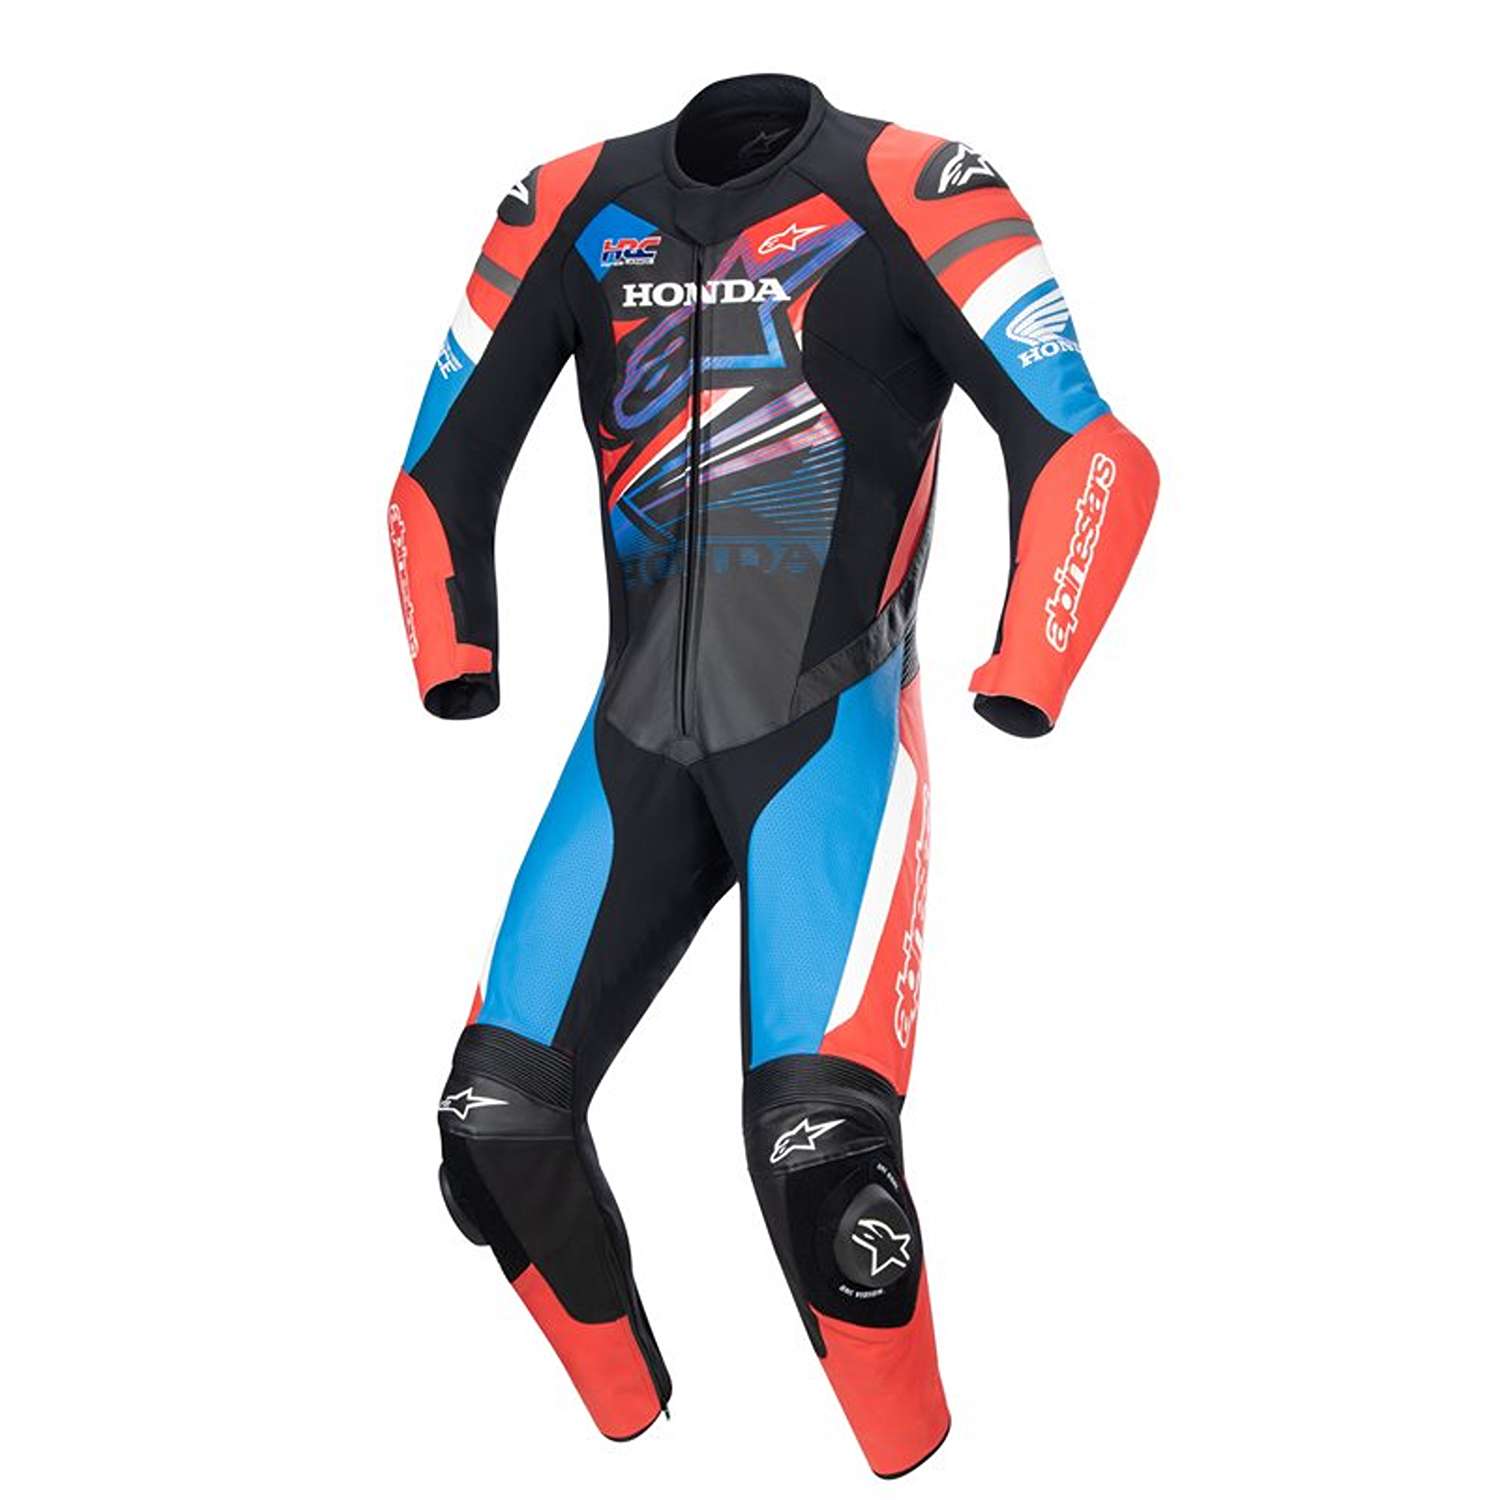 Image of Alpinestars Honda Gp Force Leather Suit Black Bright Red Blue Size 54 ID 8059347160313